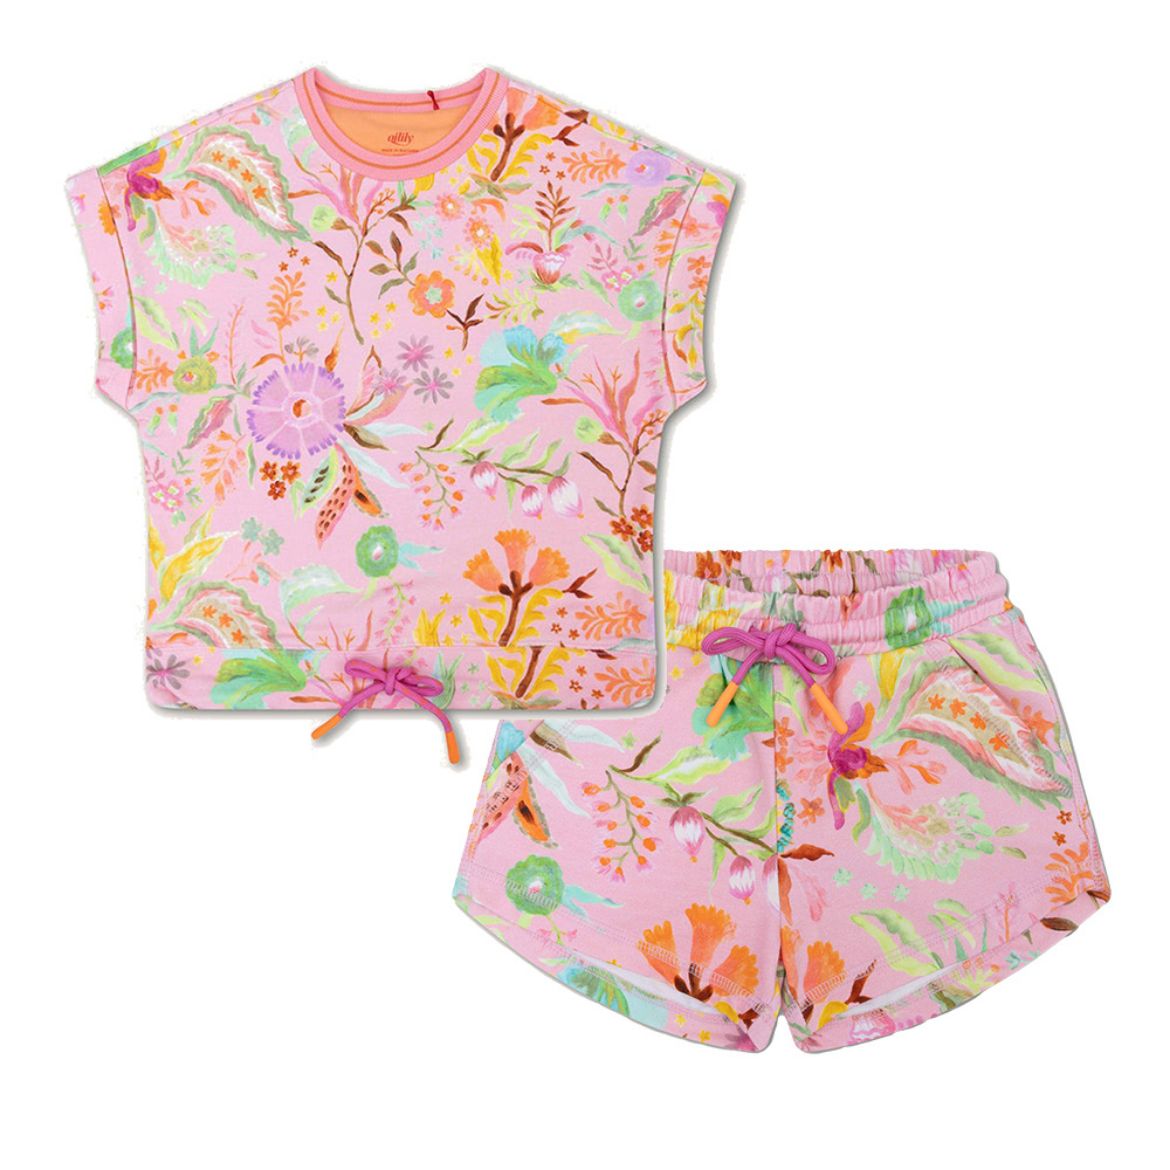 Picture of Oilily Girls Hello Jumper & Phase Printed Short Set